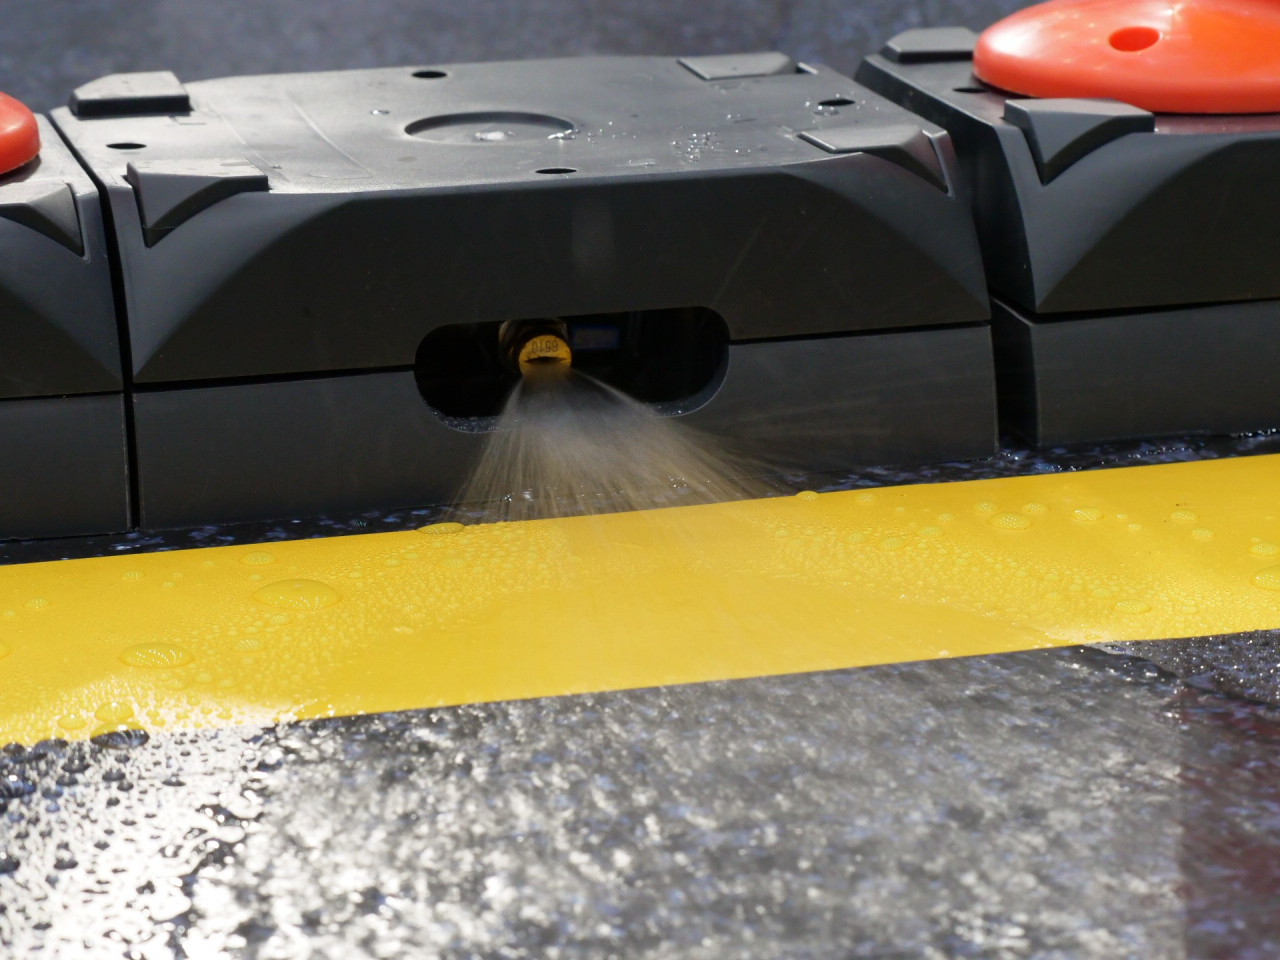 Blakstone's Clean Road System sprays water automatically in the event of fine dust and heat waves. (Blakstone)